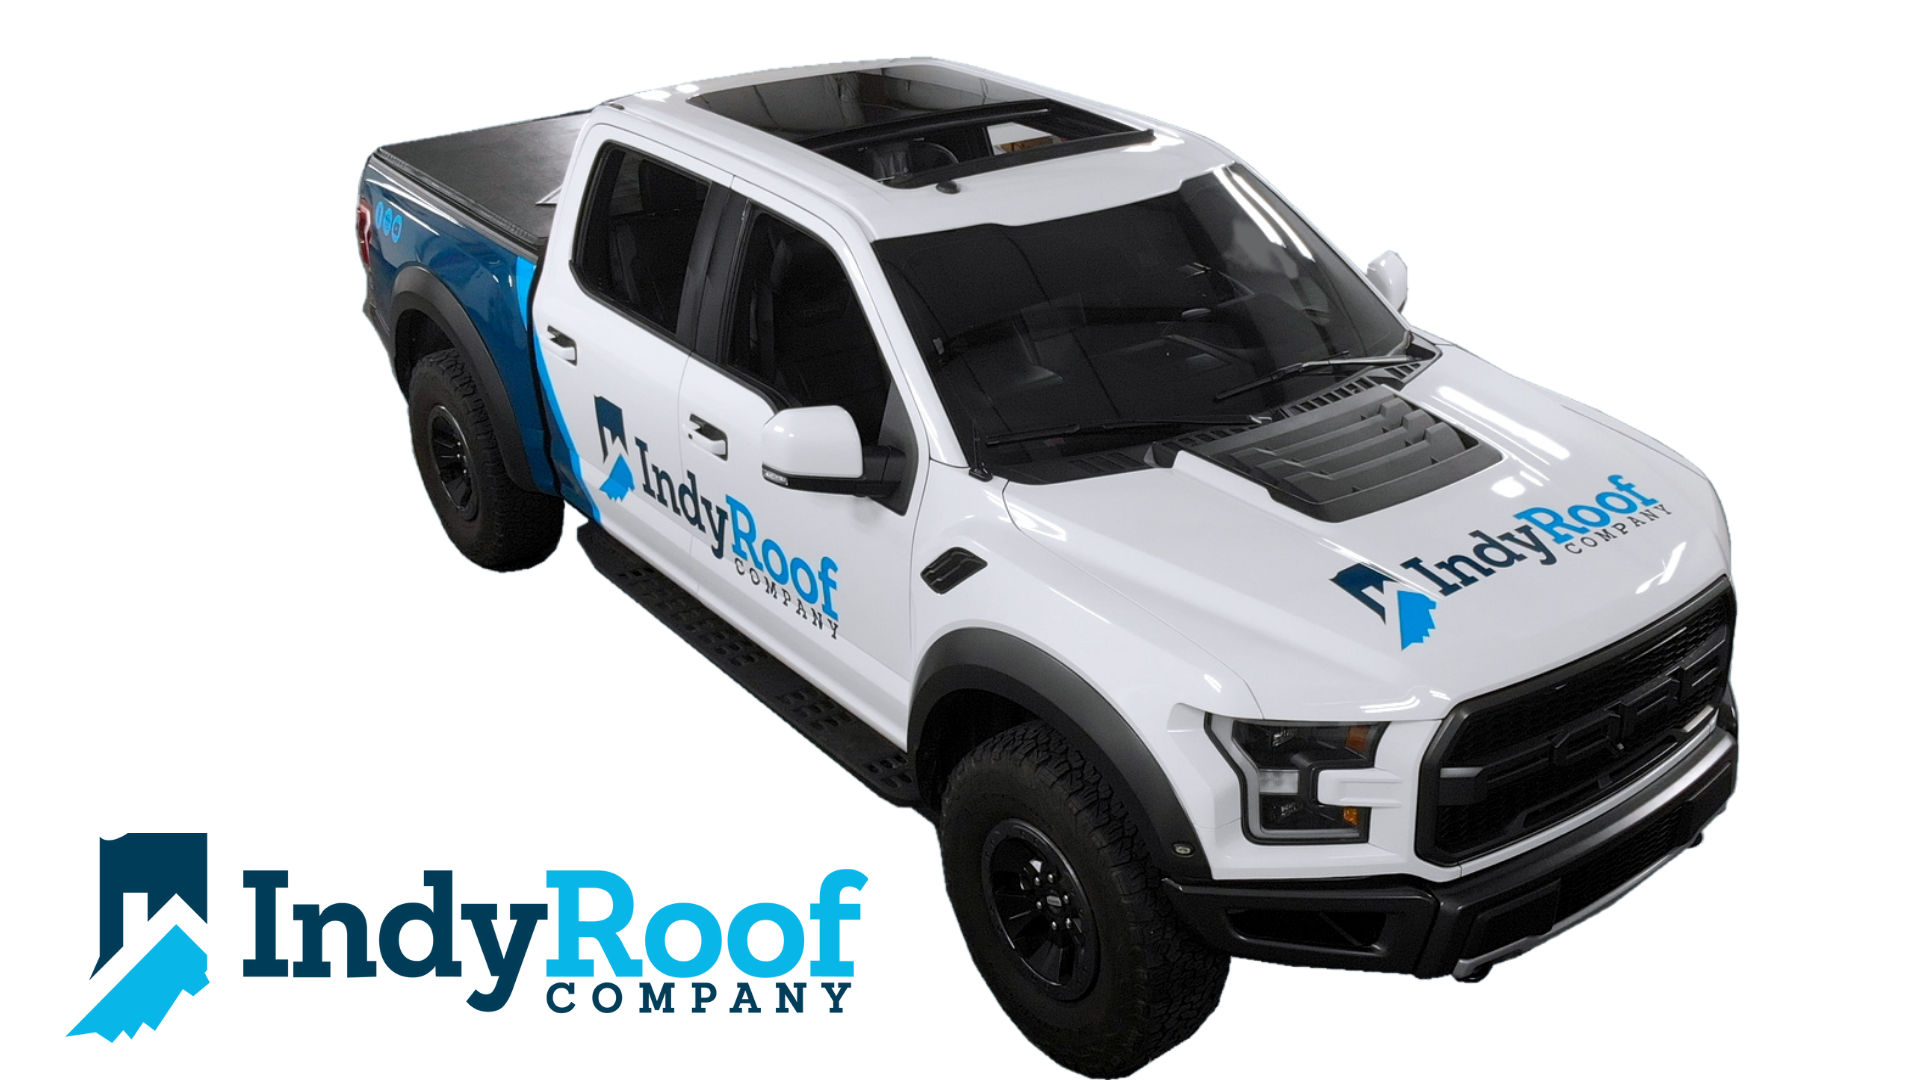 Savage Media rebranded Indy Roof Company including new truck wrap designs